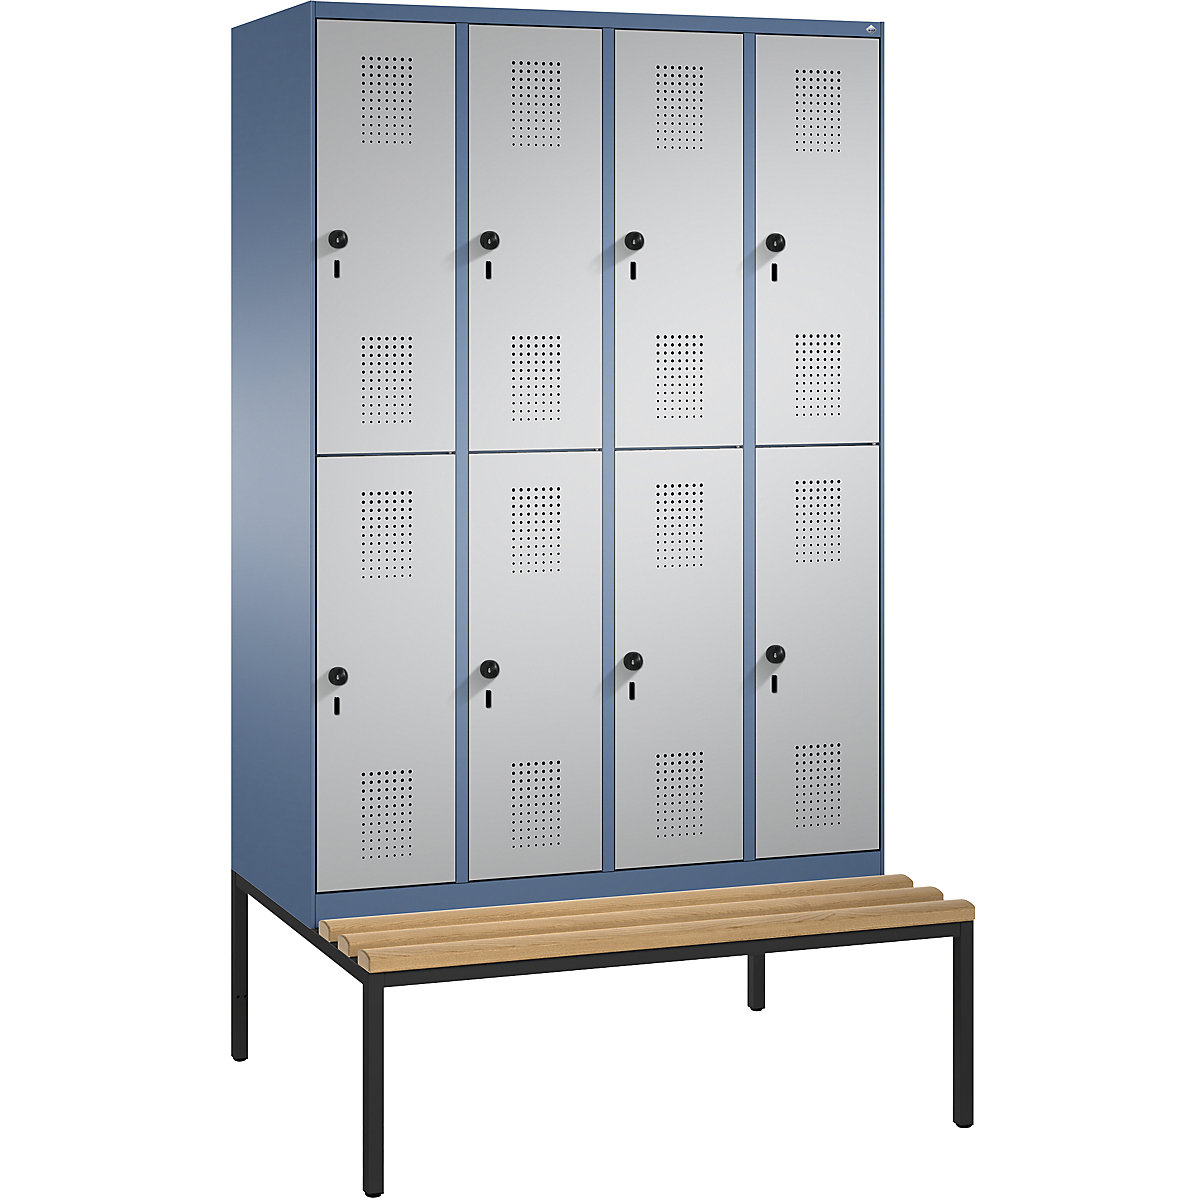 EVOLO cloakroom locker, double tier, with bench – C+P, 4 compartments, 2 shelf compartments each, compartment width 300 mm, distant blue / white aluminium-14